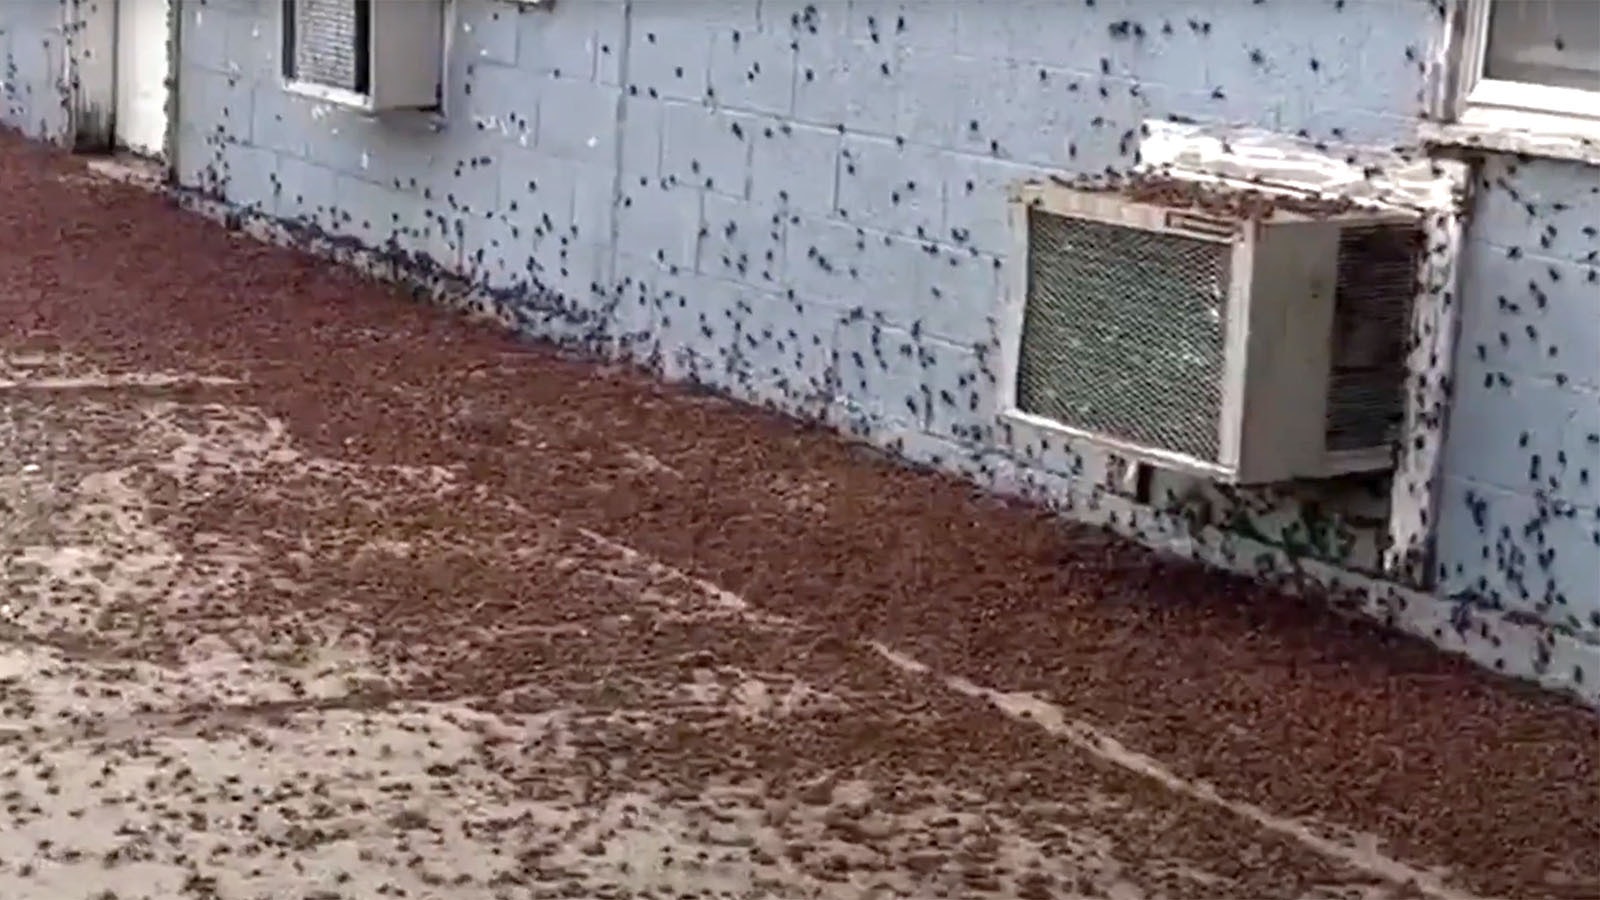 There are so many crickets in Edgerton, Wyoming, that they're inches deep in some places. Local resident Ava Blackmore shared images of the infestation with Cowboy State Daily.